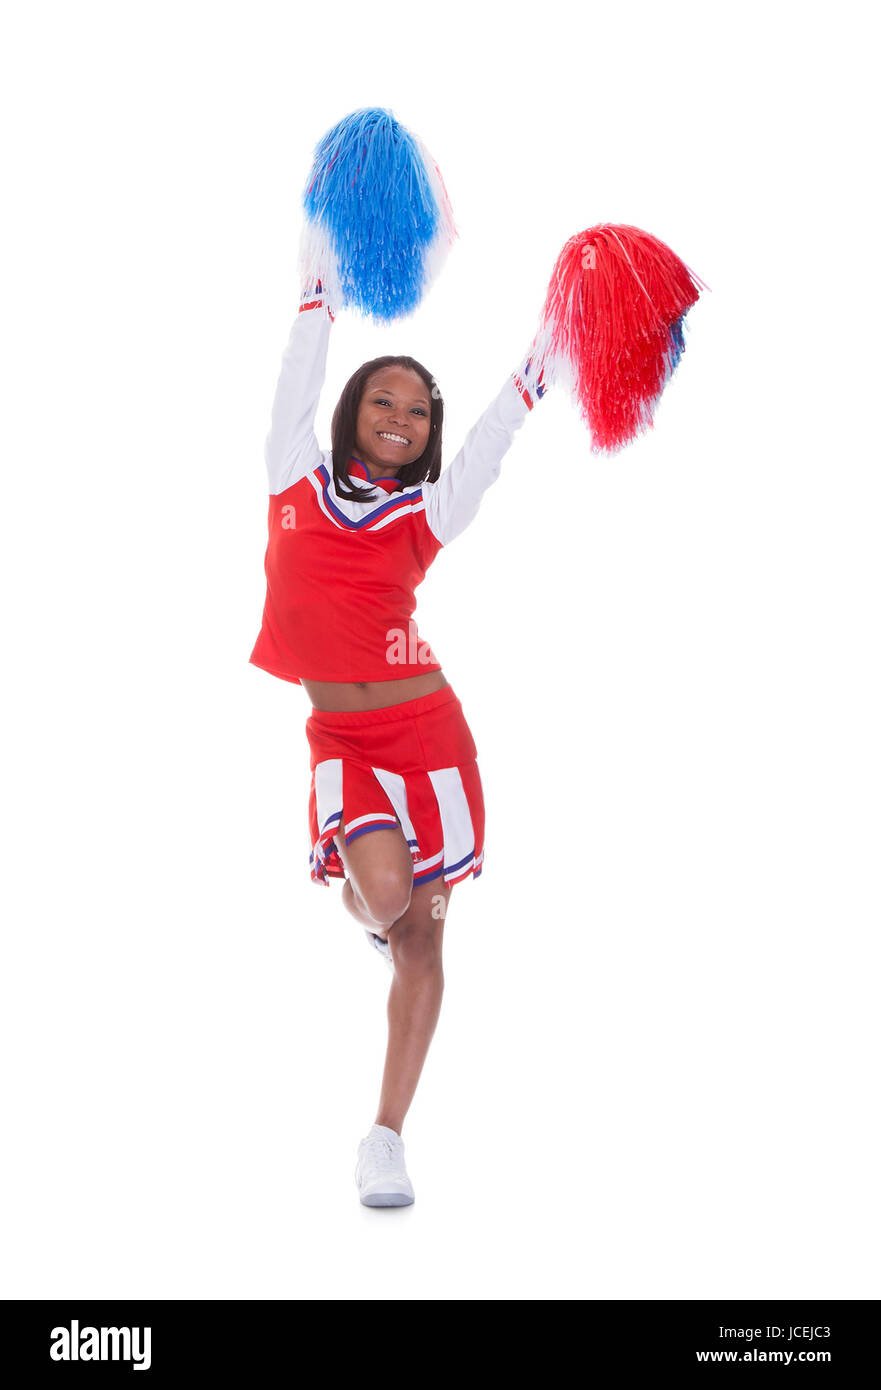 Cheerleader pompon Cut Out Stock Images & Pictures - Alamy